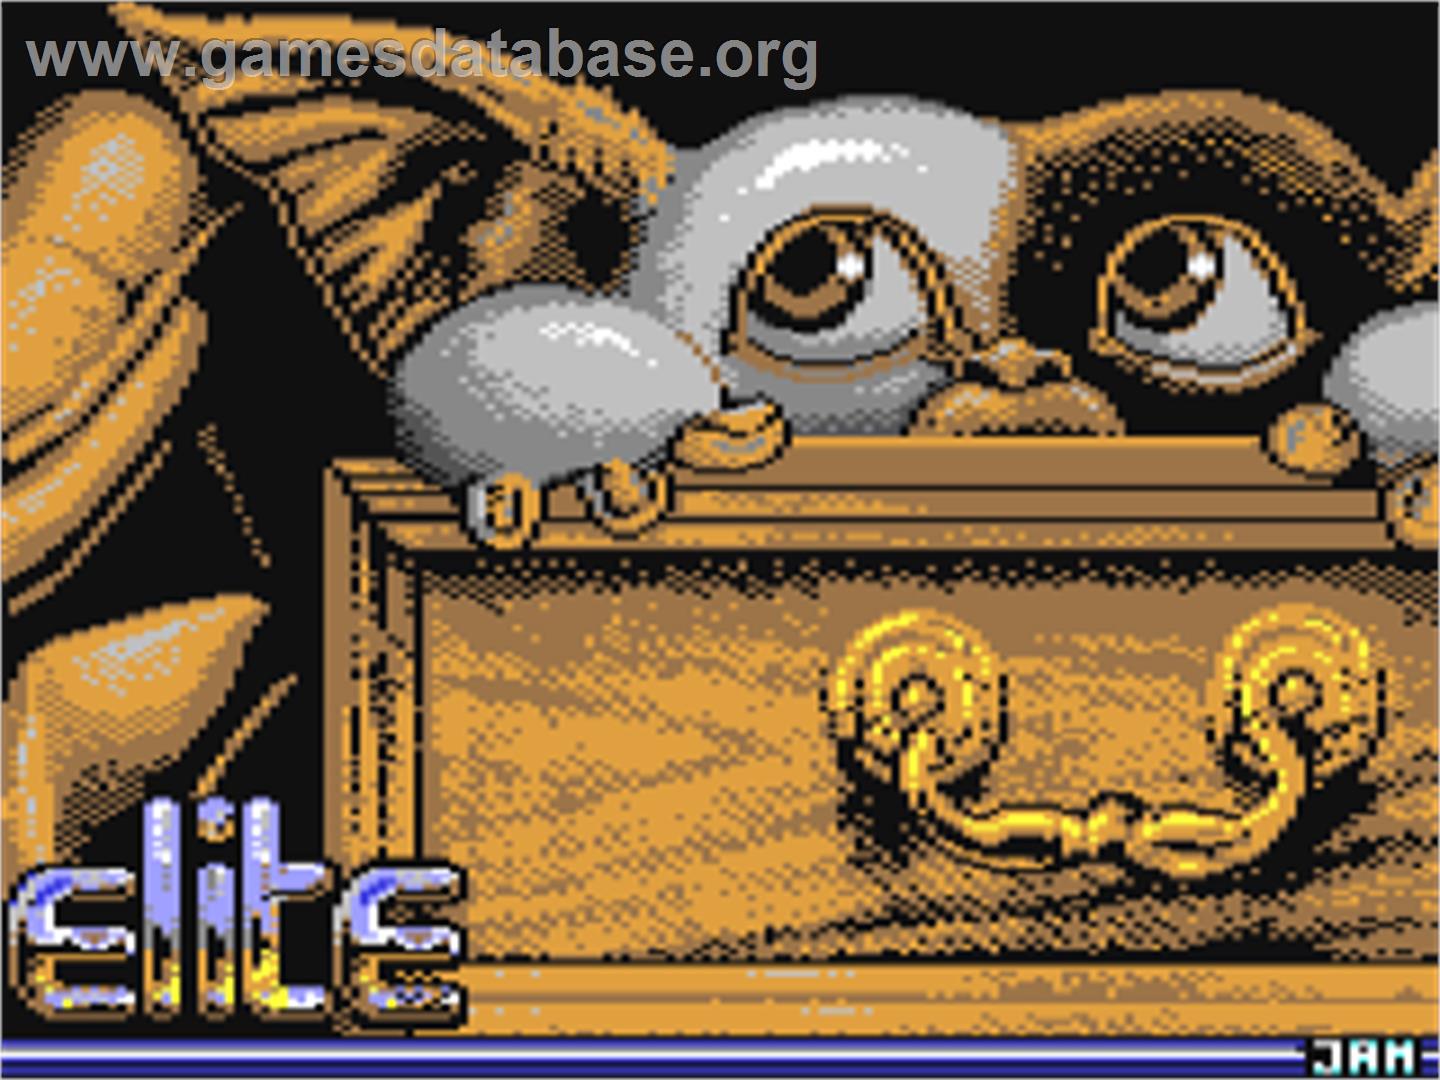 Gremlins 2: The New Batch - Commodore 64 - Artwork - Title Screen